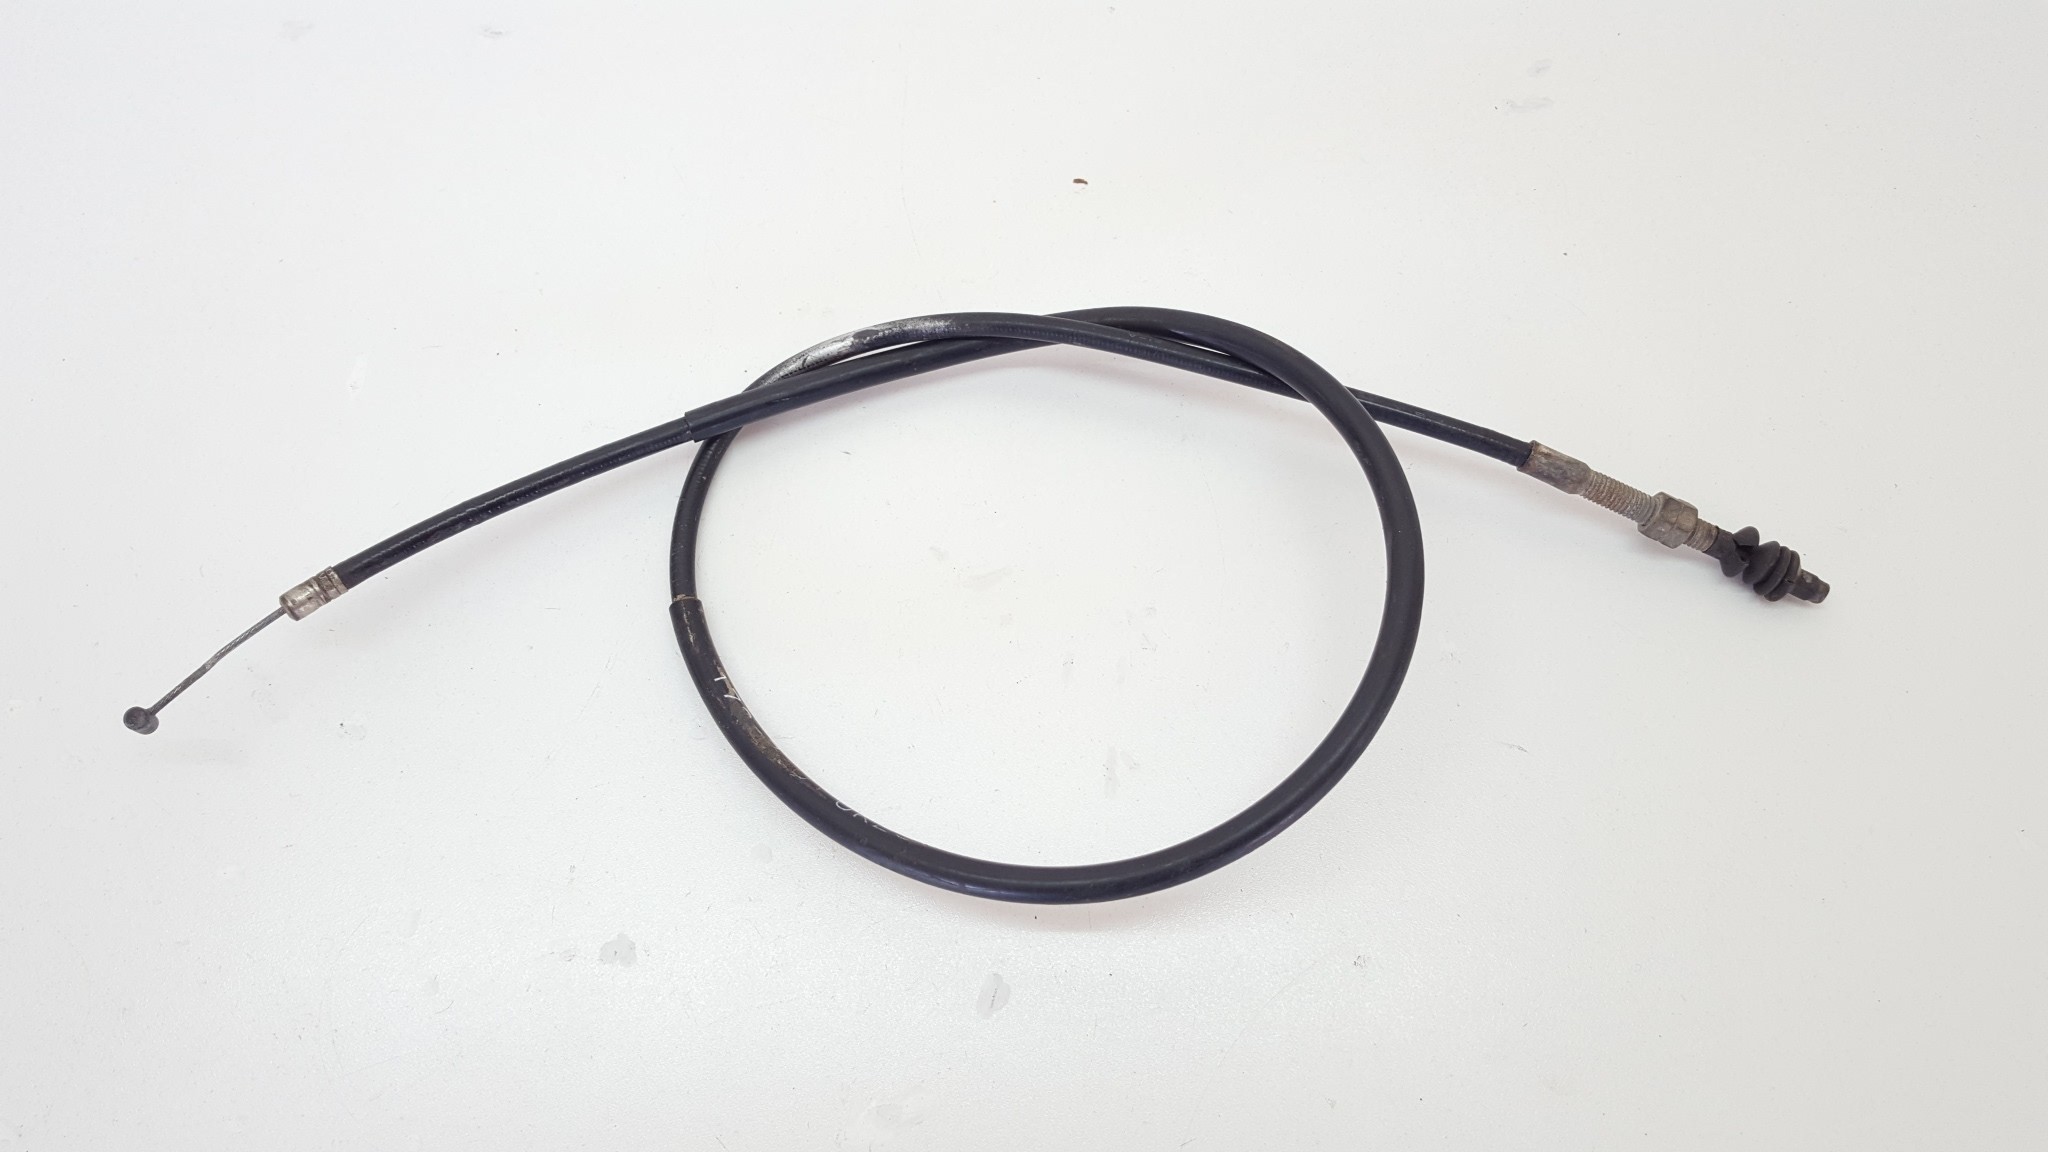 Clutch Cable for Honda XR80 XR 80 1982 80-00